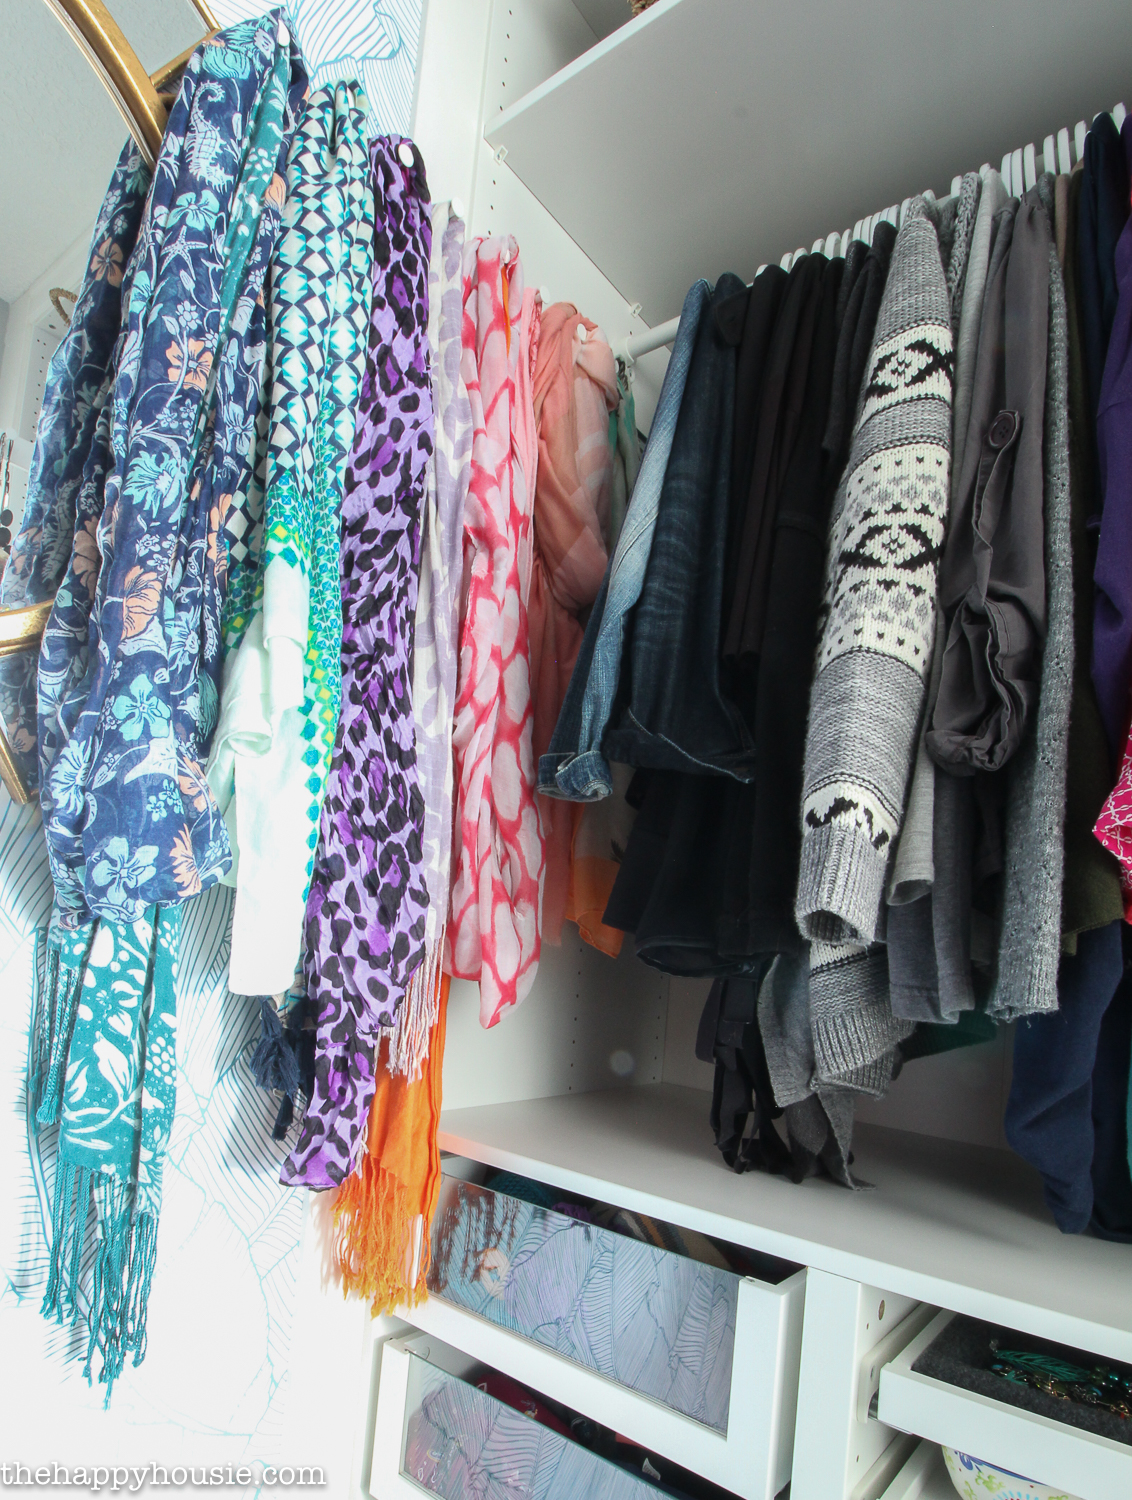 7 Tips For Completely Organizing Your Closet And Dresser The